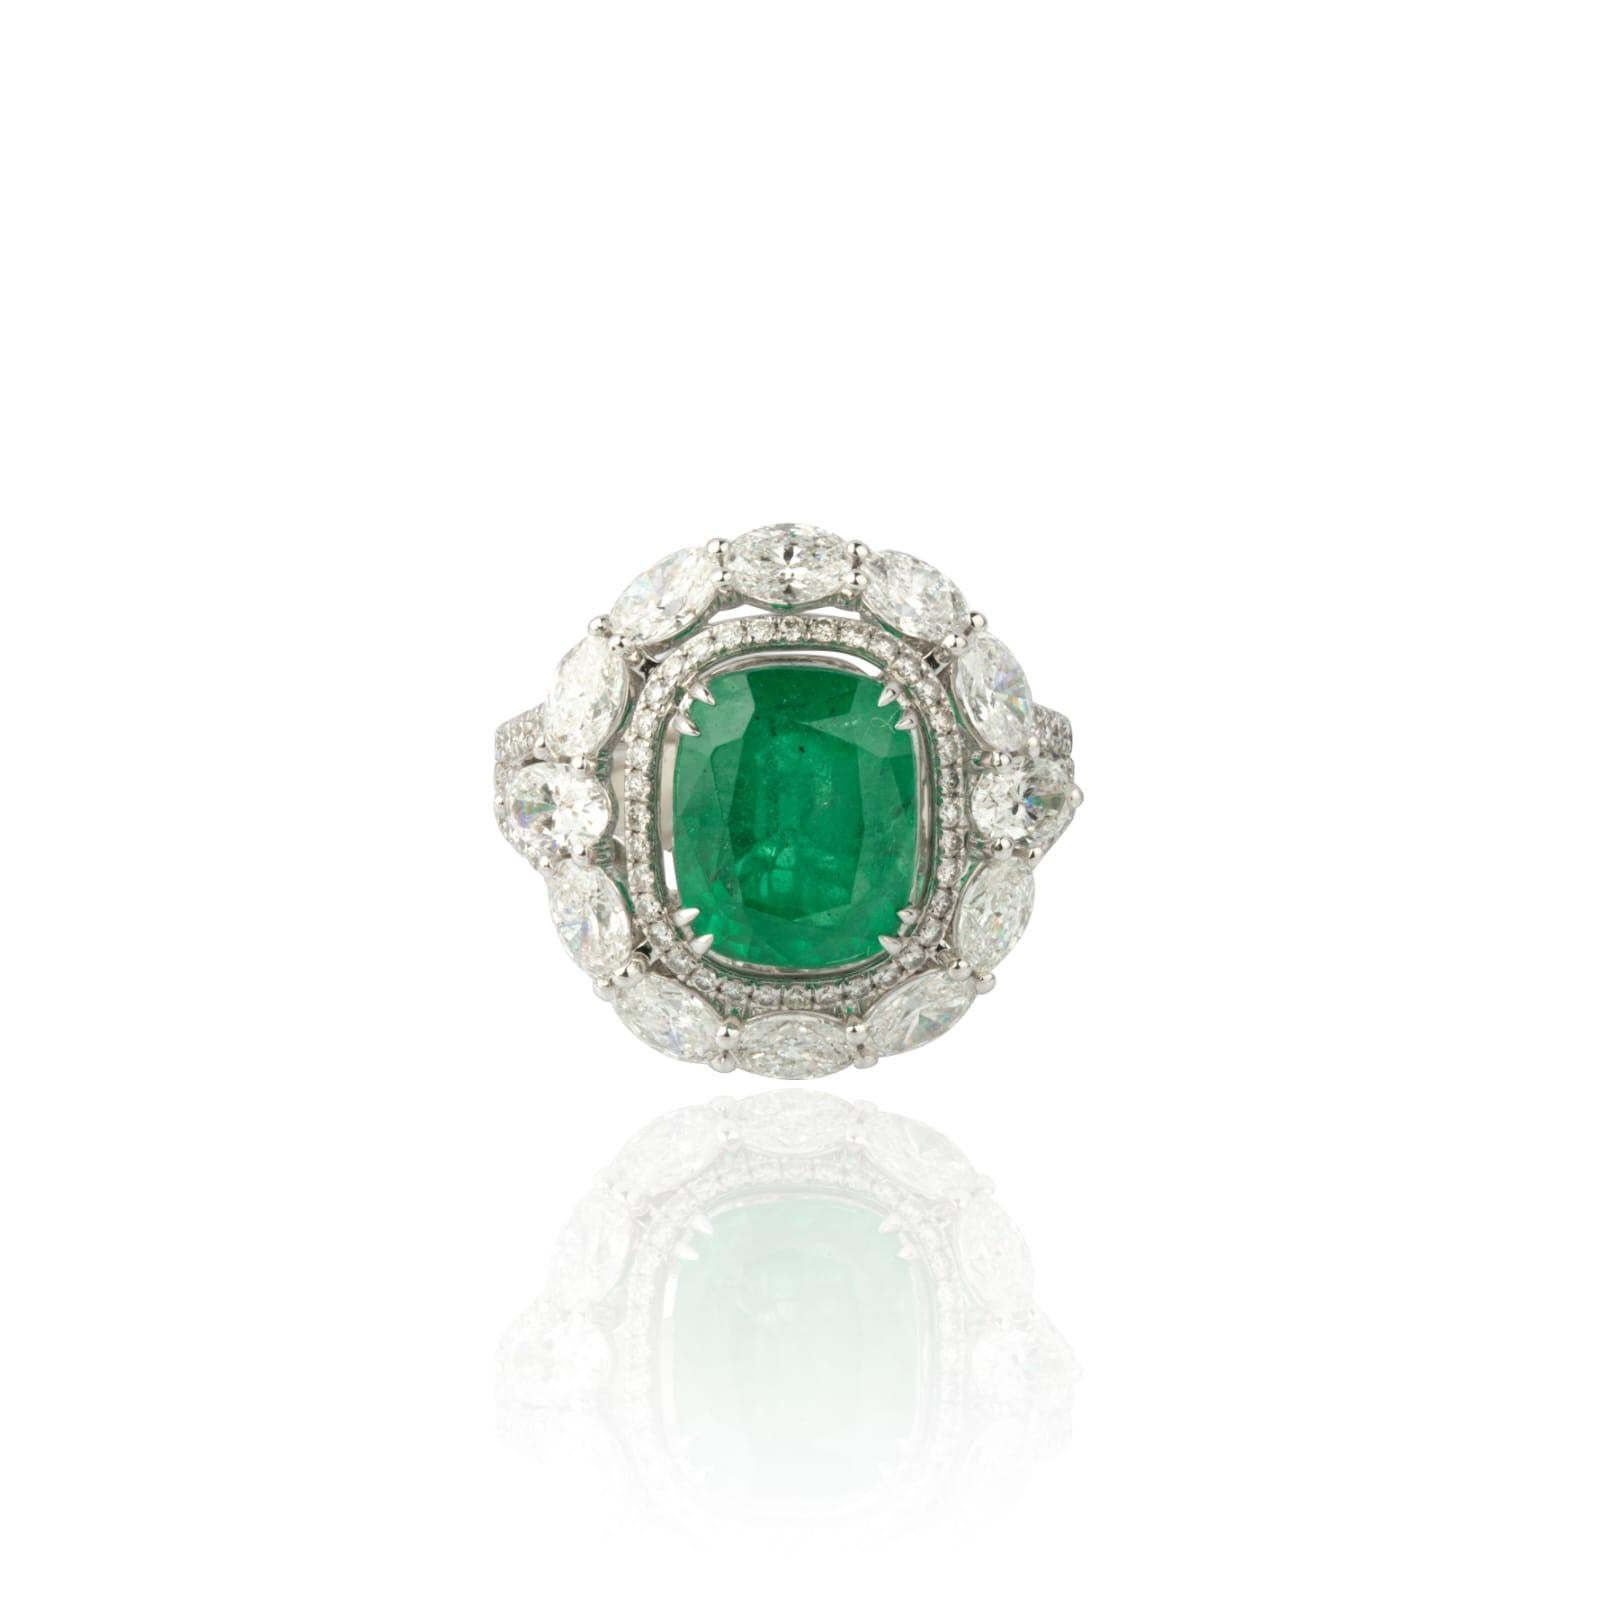 diamonds 1.86cts
emerald 6.16cts
gold  7.49gms



It’s very hard to capture the true color and luster of the stone, I have tried to add pictures which are taken professionally and by me from my I phone to reflect the true image of the item.
Most of